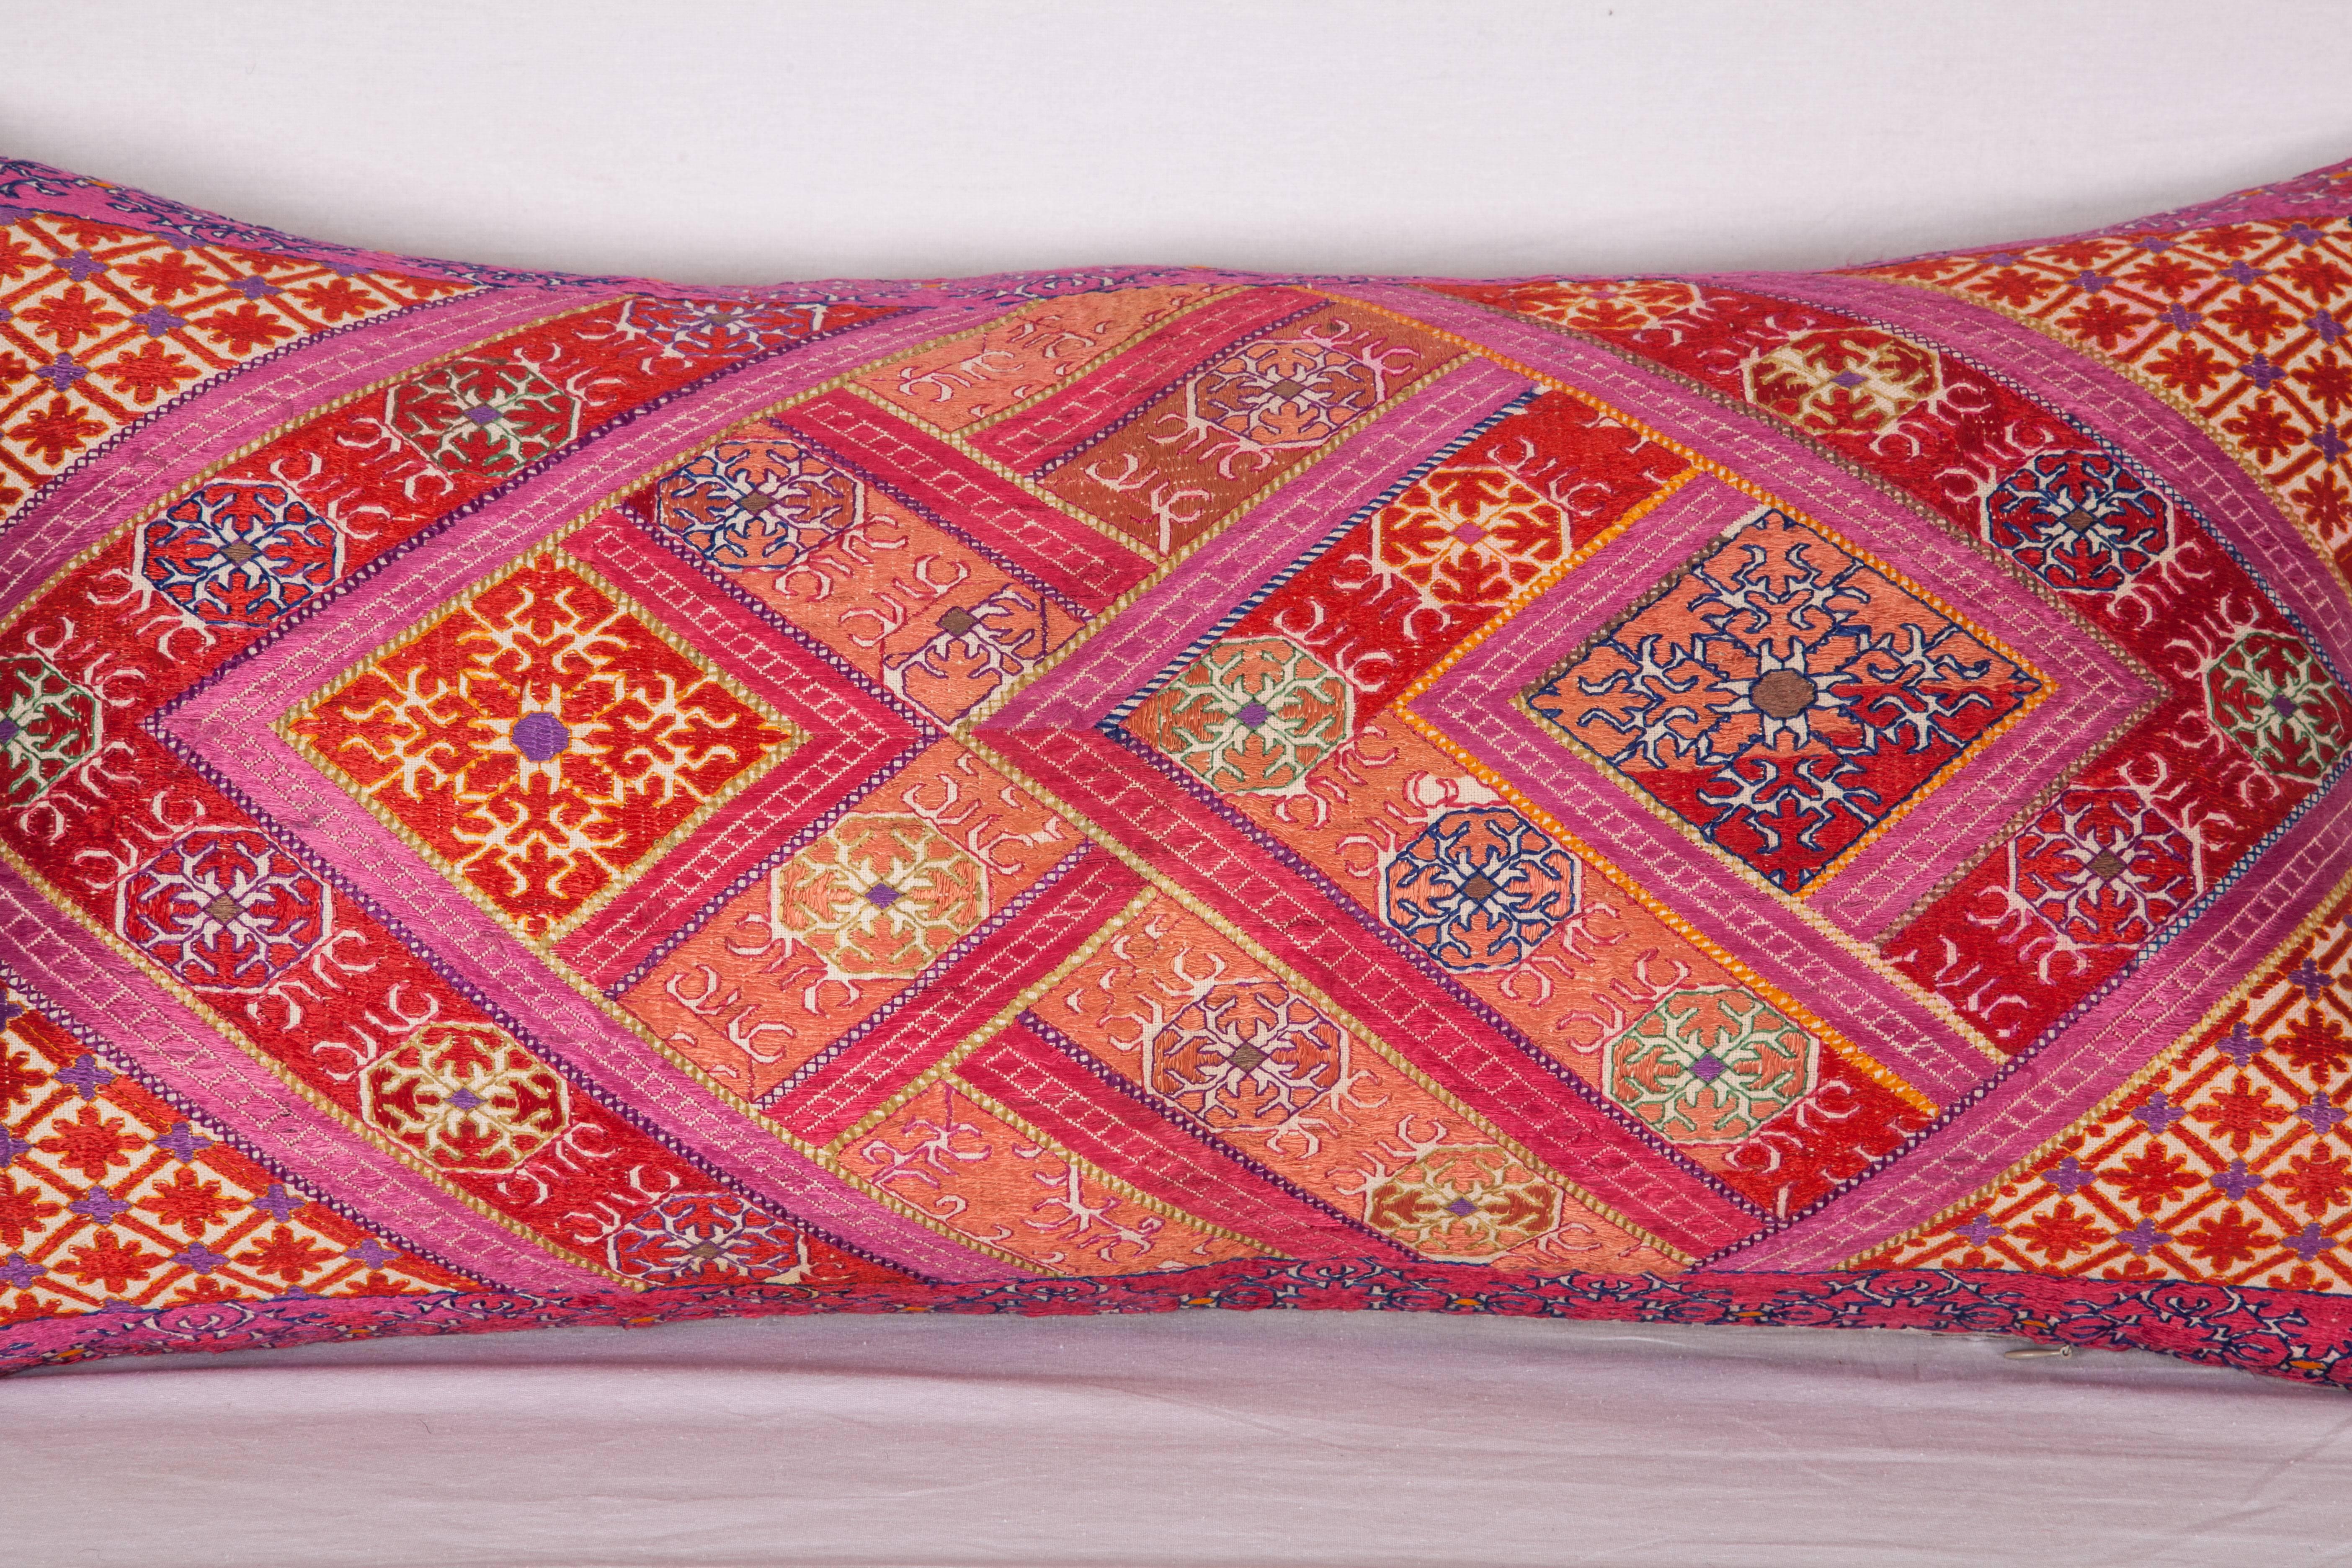 Silk embroidery on cotton fabric from Swat Valley of Pakistan. It does not come with an insert but it comes with a bag made to the size and out of cotton to accommodate the filling. The backing is made of linen. Please note filling is not provided.